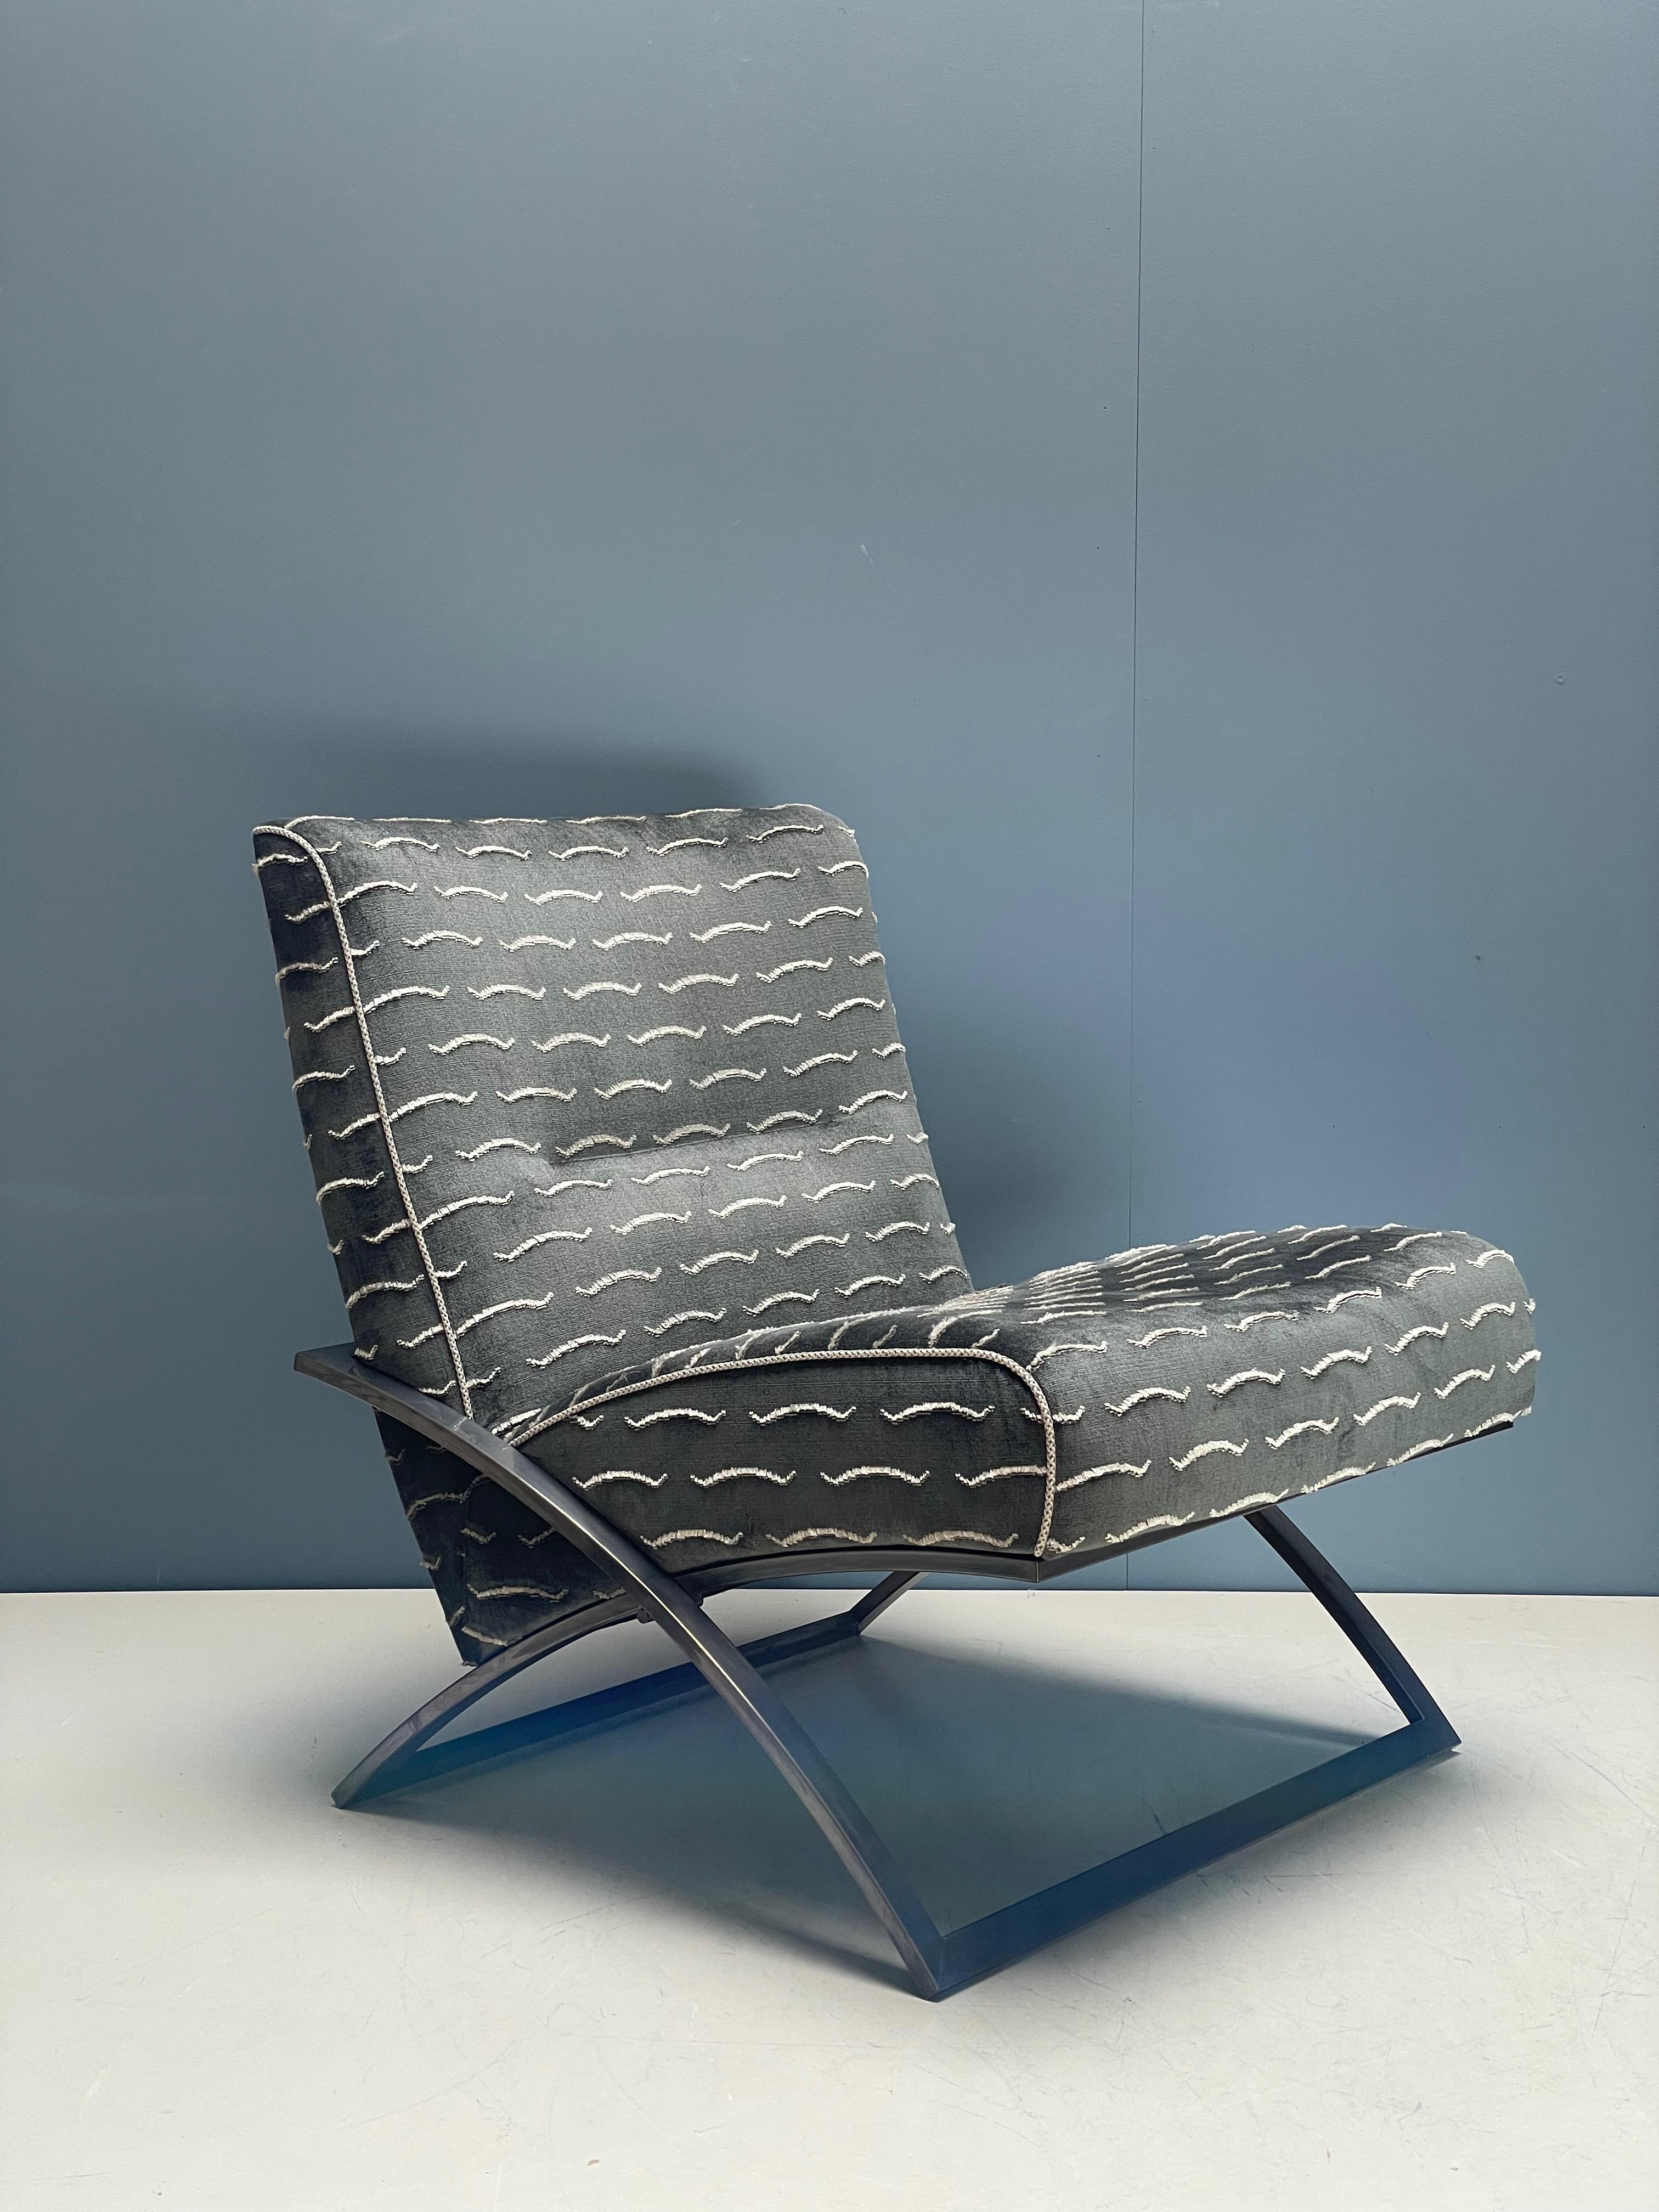 The Mid-Century Modern Wave S11 armchair was designed by Peter Ghyczy in 2016 and hand-crafted in the Ghyczy atelier in the South of the Netherlands. The Wave S11 armchair features an ergonomic and dynamic frame composed of aged brass tubing and a